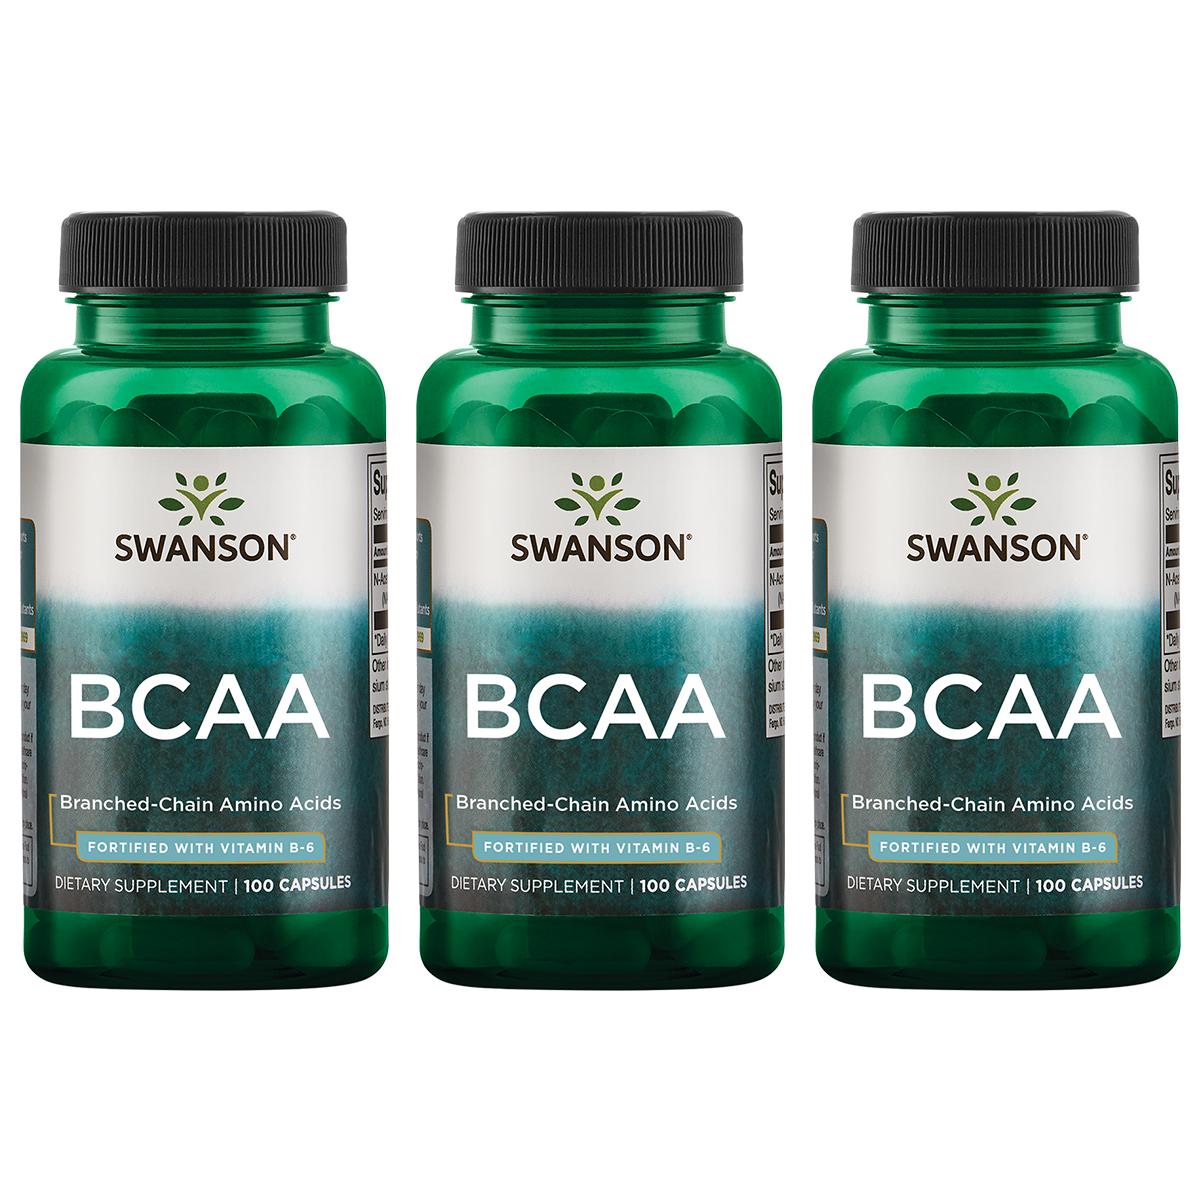 Swanson Premium Bcaa Branched-Chain Amino Acids - Fortified with Vitamin B6 3 Pack 100 Caps